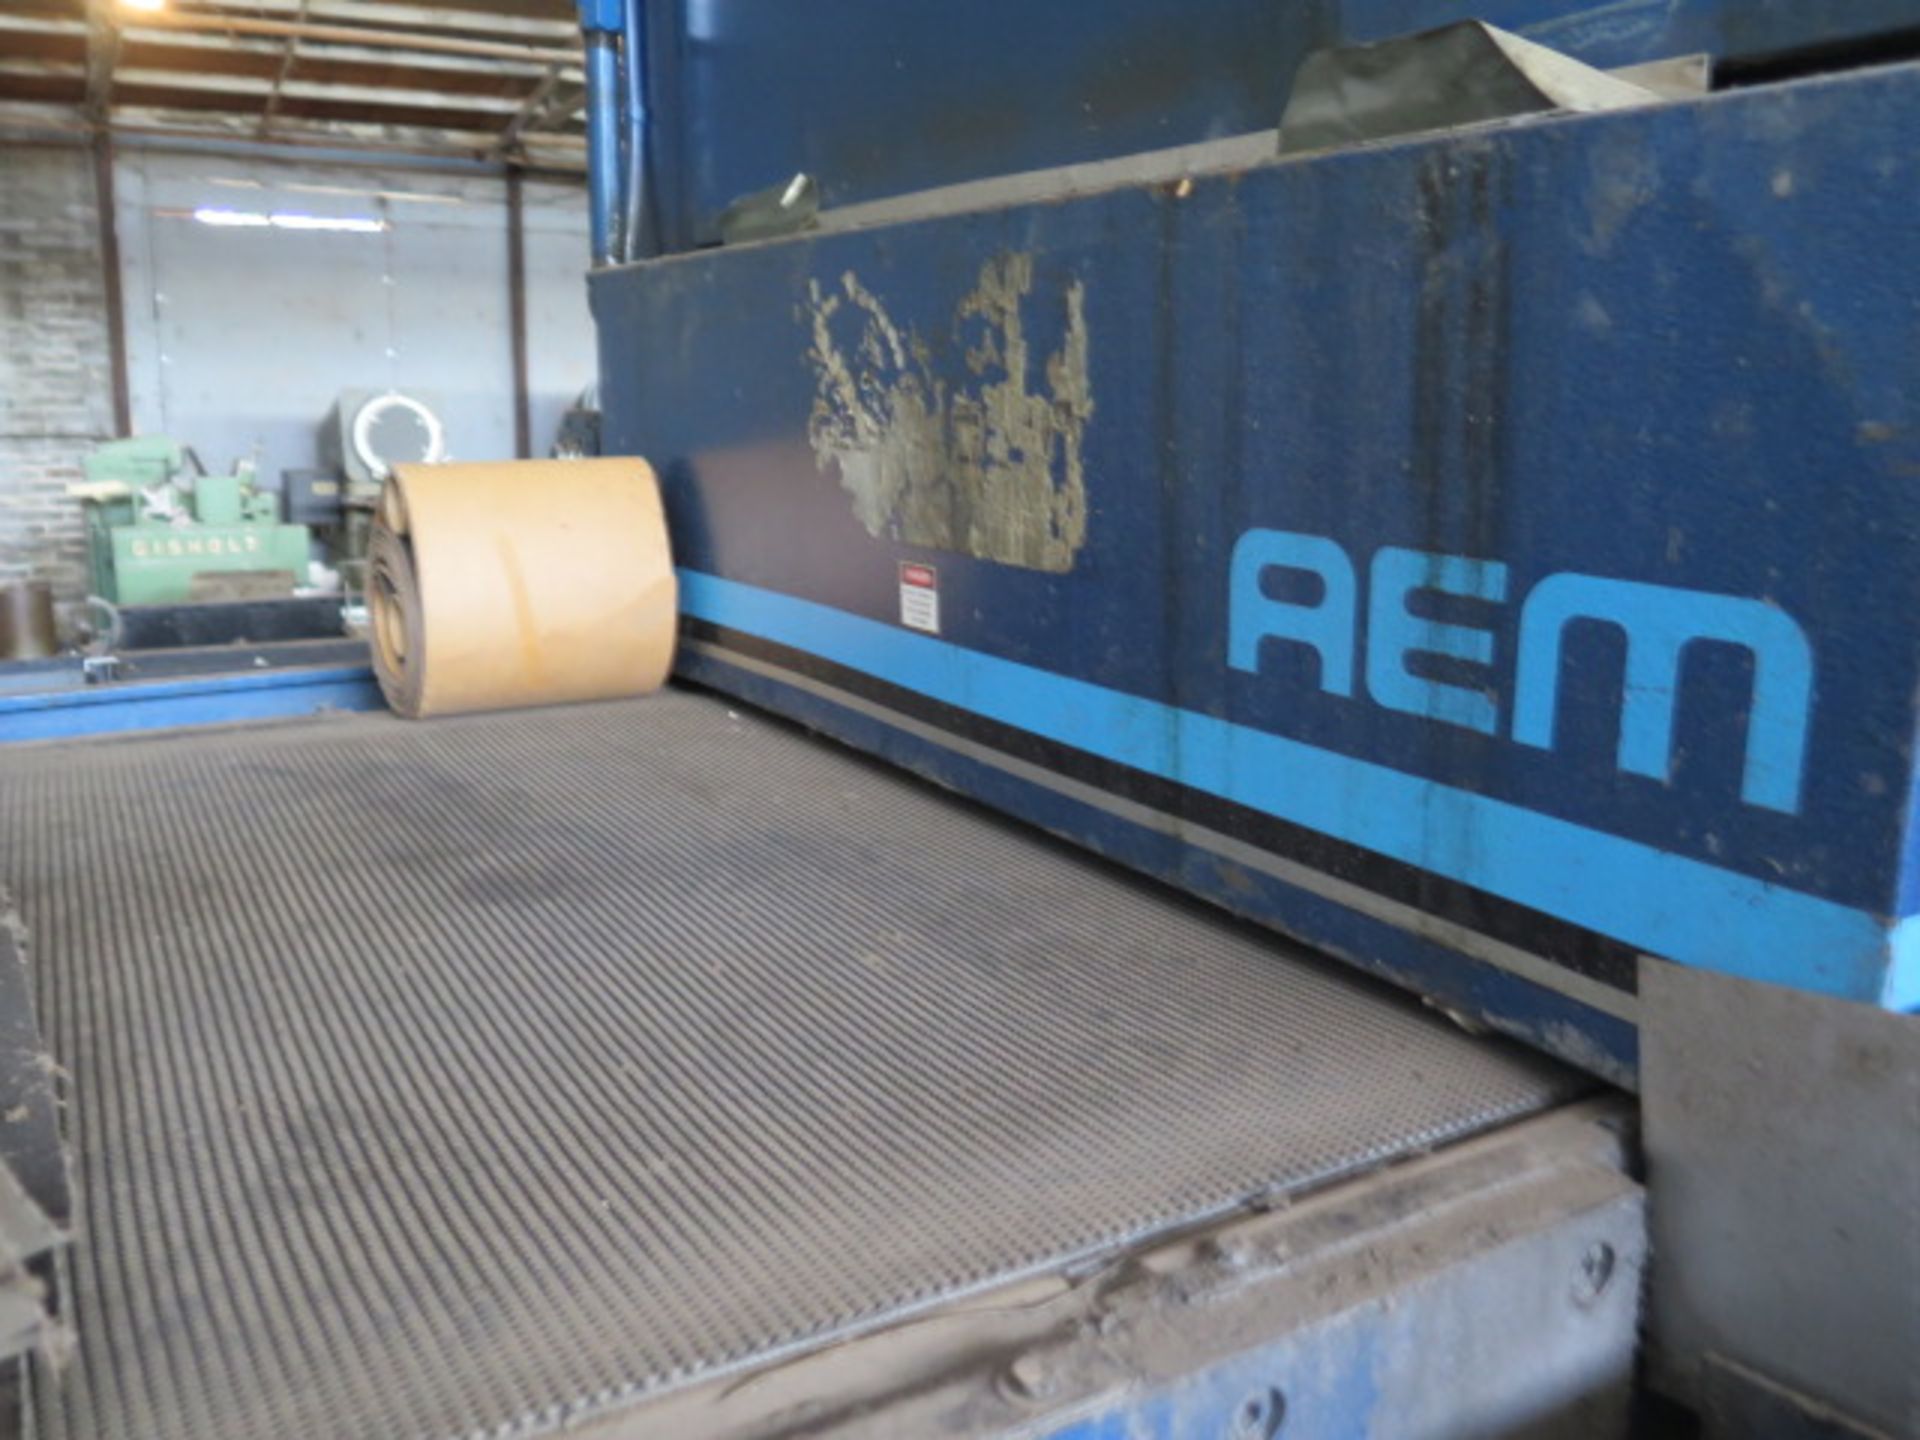 AEM Double Sided 36" Belt Wet Belt Grainer w/ Cleanomat Air Knife (SOLD AS-IS - NO WARRANTY) - Image 7 of 16